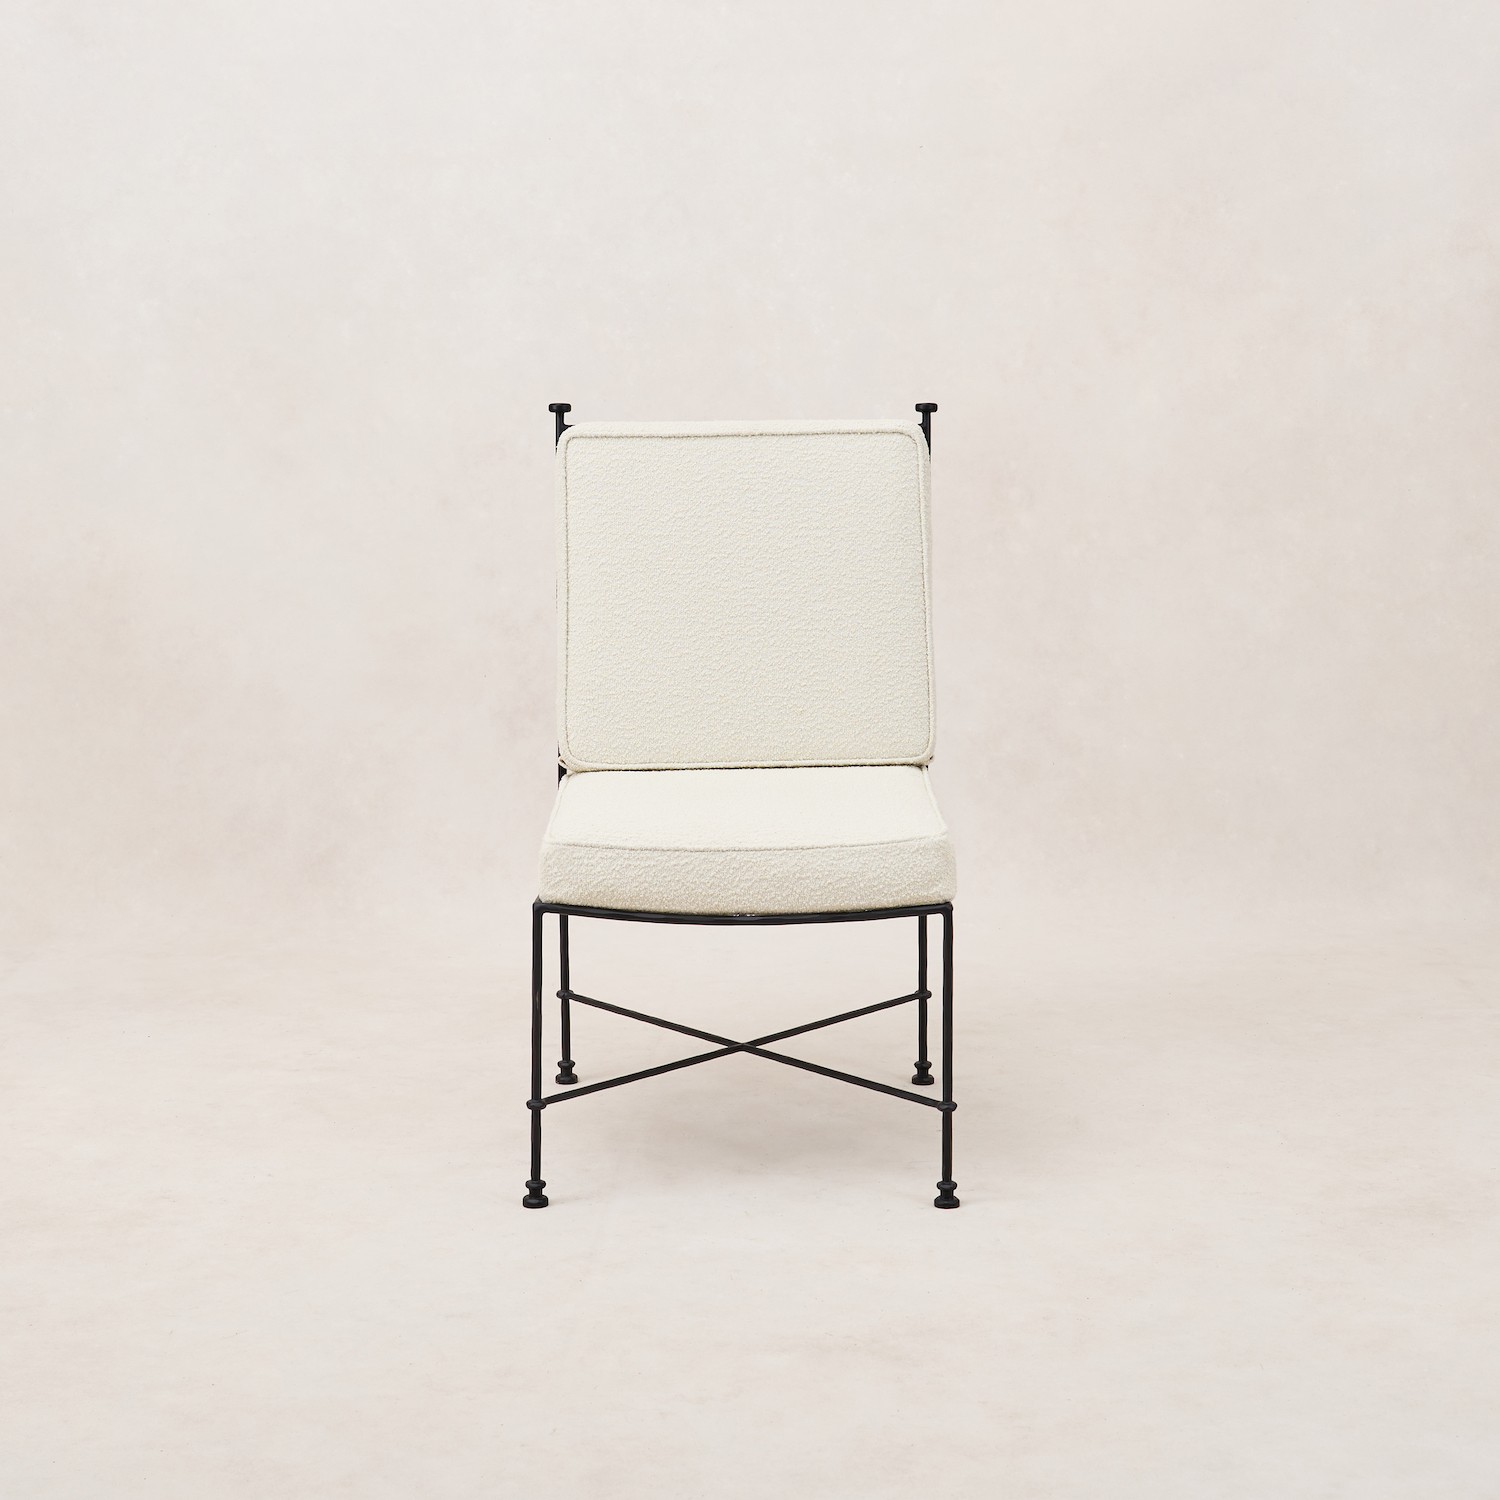 a white chair with a black frame on a white background